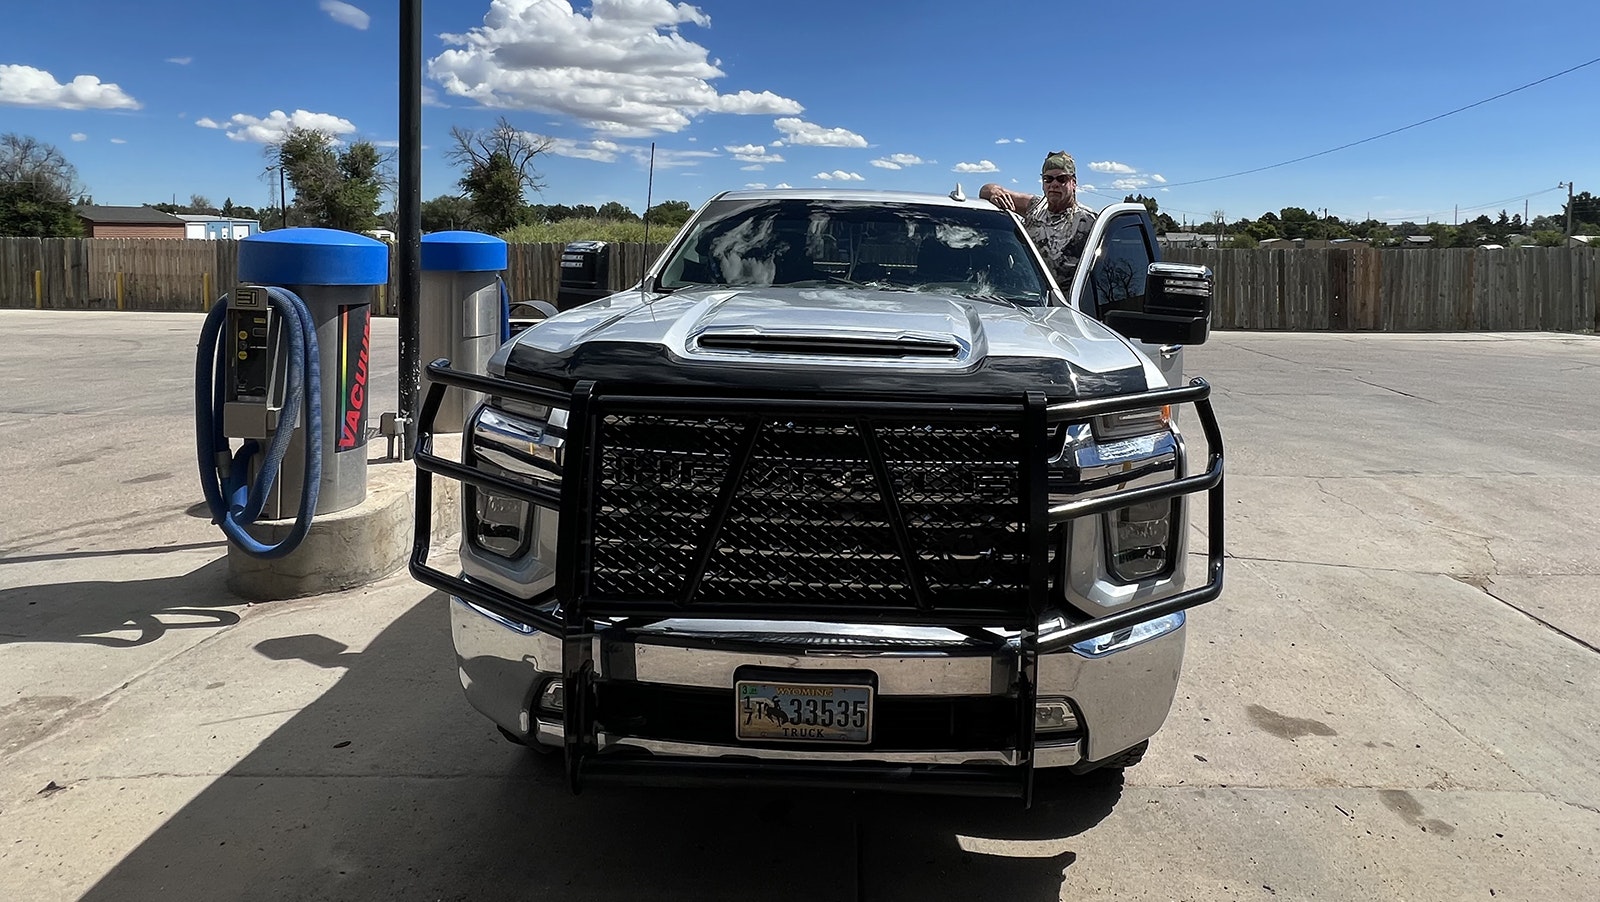 Mark Fillmore of Cheyenne with his 2020 Chevy 2500 Silverado. While his is a work truck, Fillmore said he's a truck guy through and through.